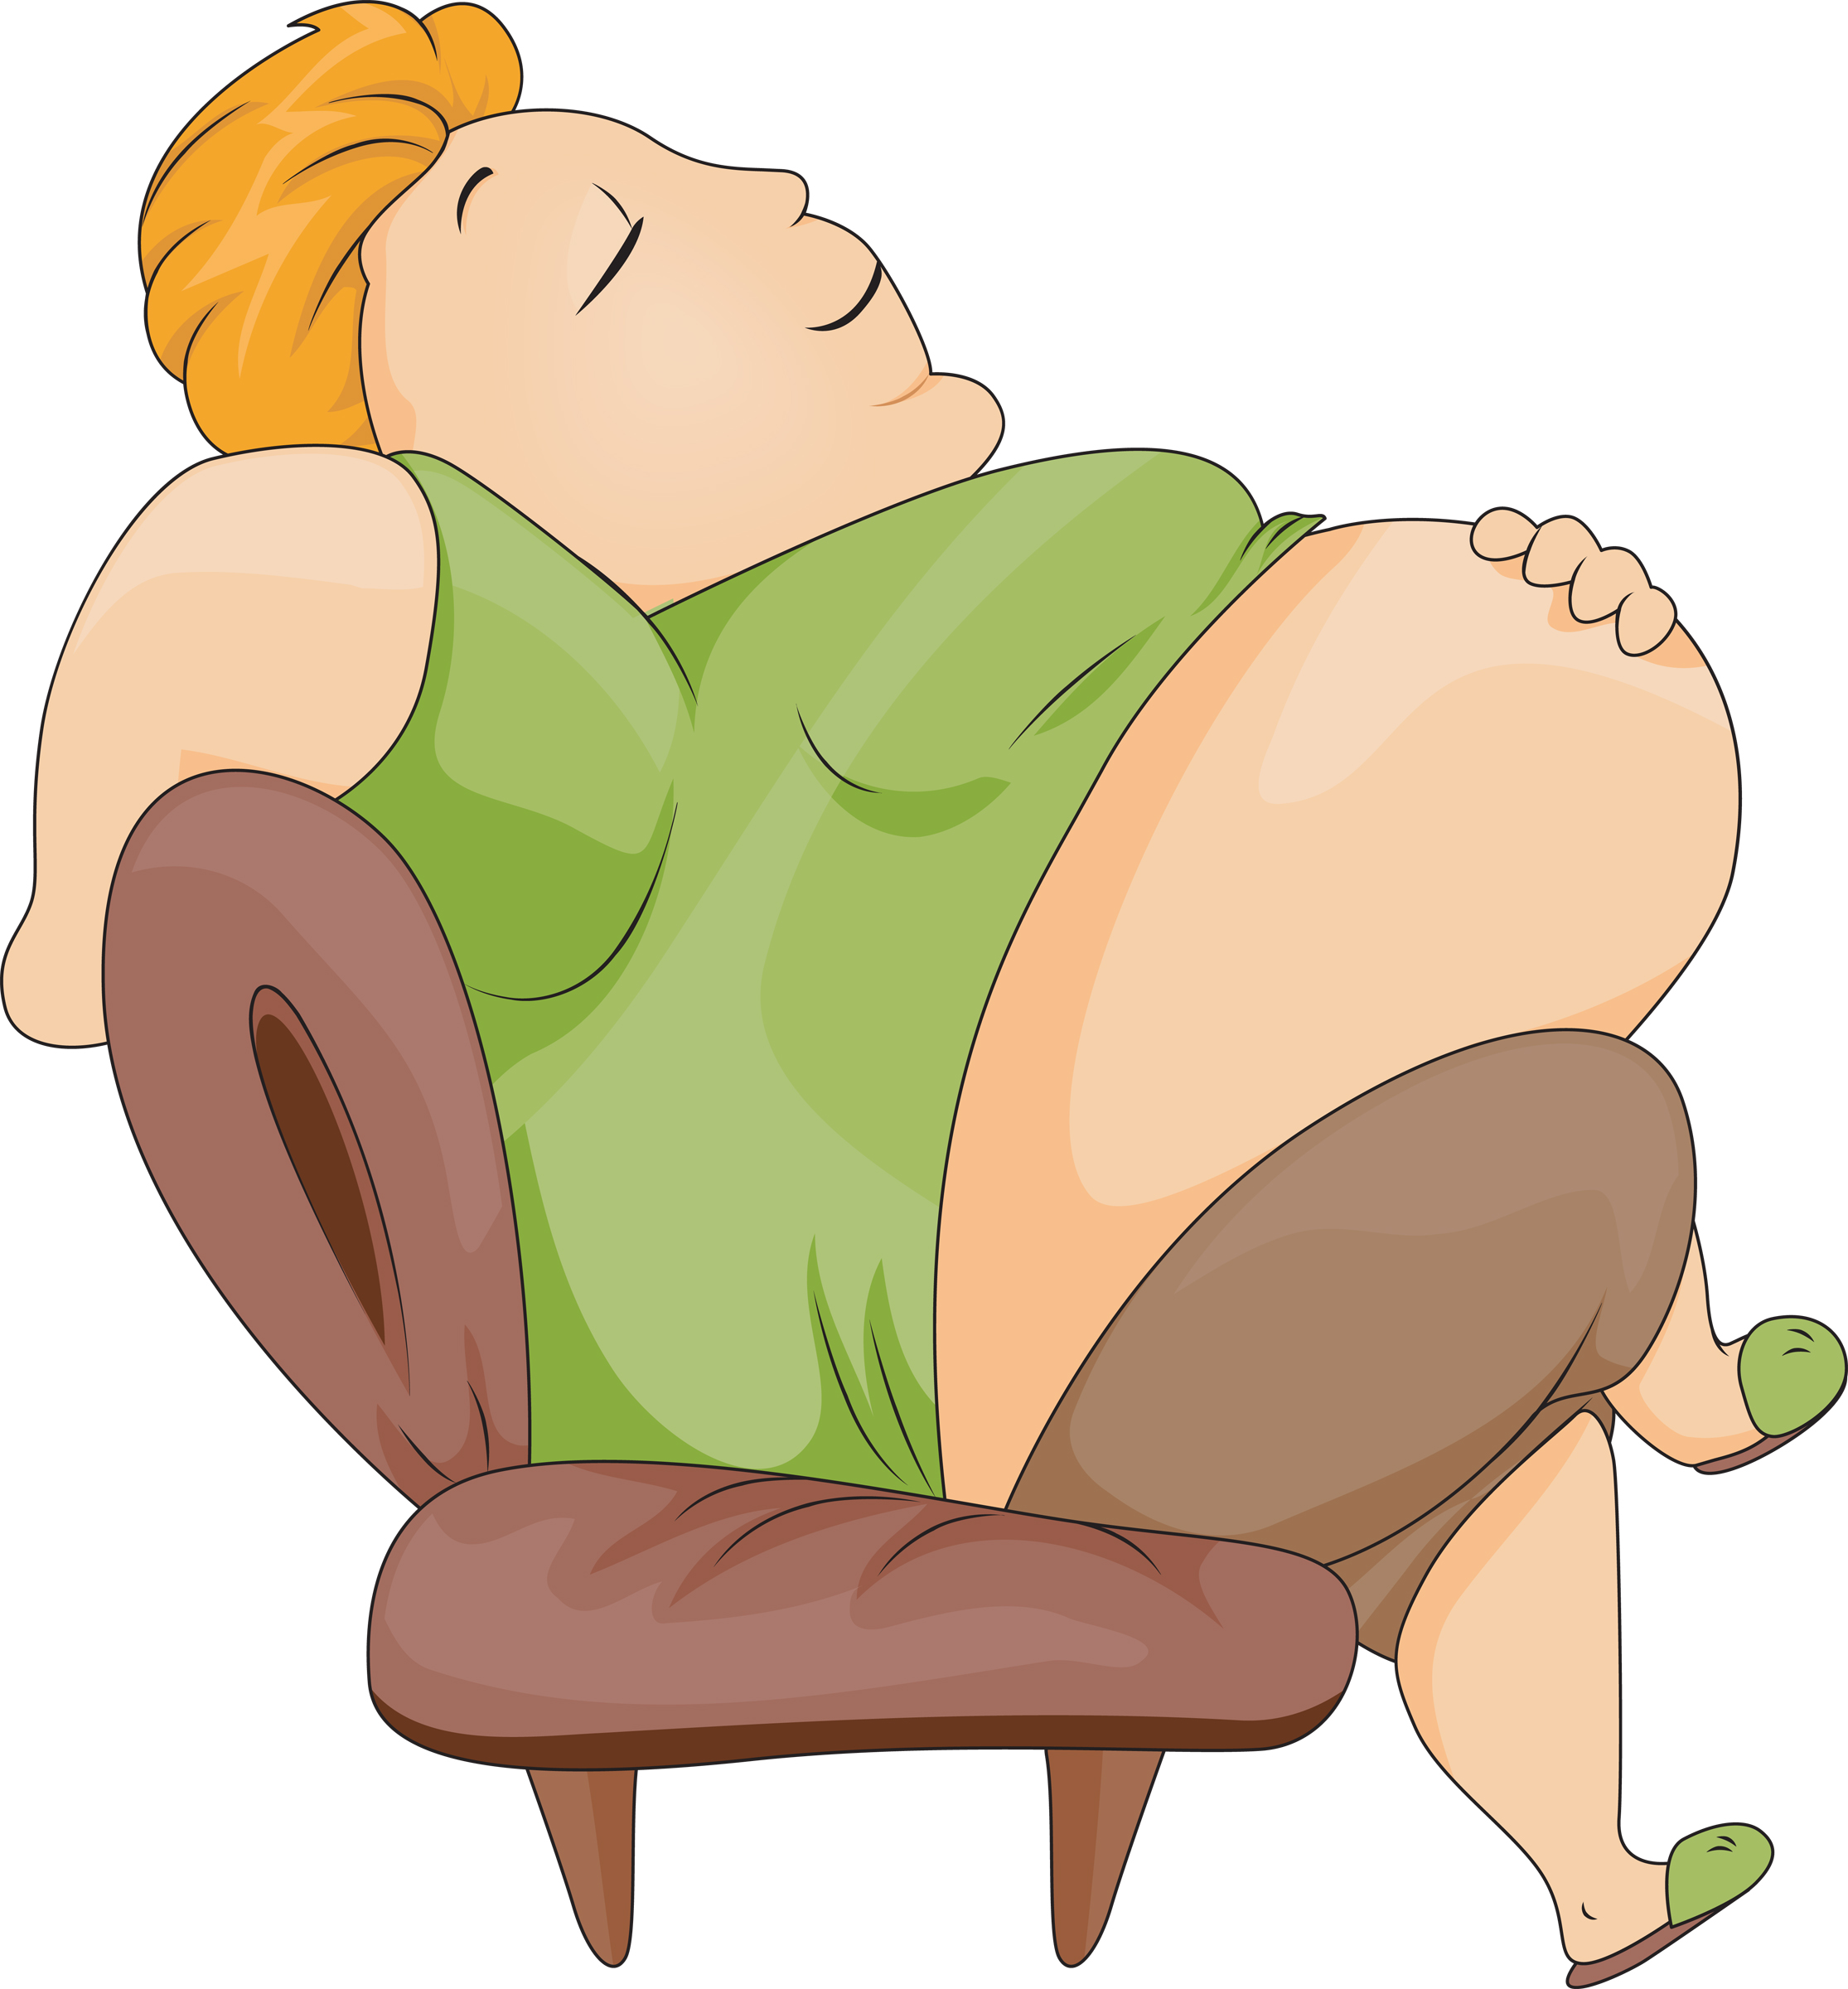 10 Fat People Cartoon Images Free Cliparts That You Can Download To